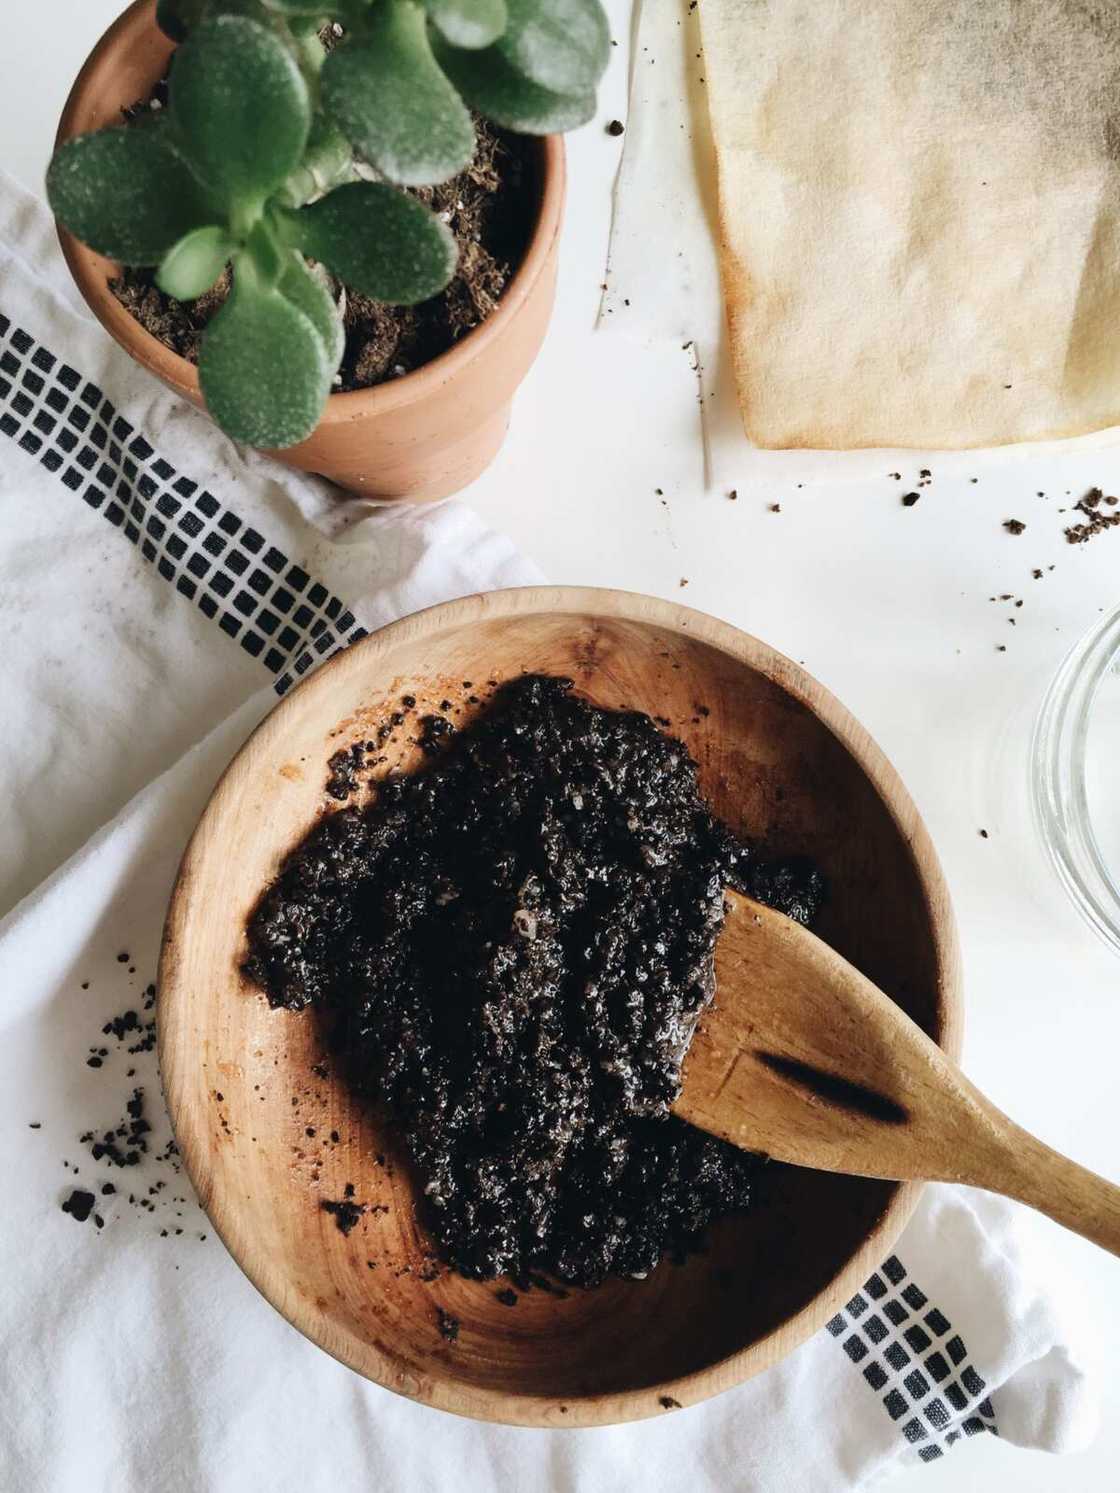 How to use coffee scrub for better effect